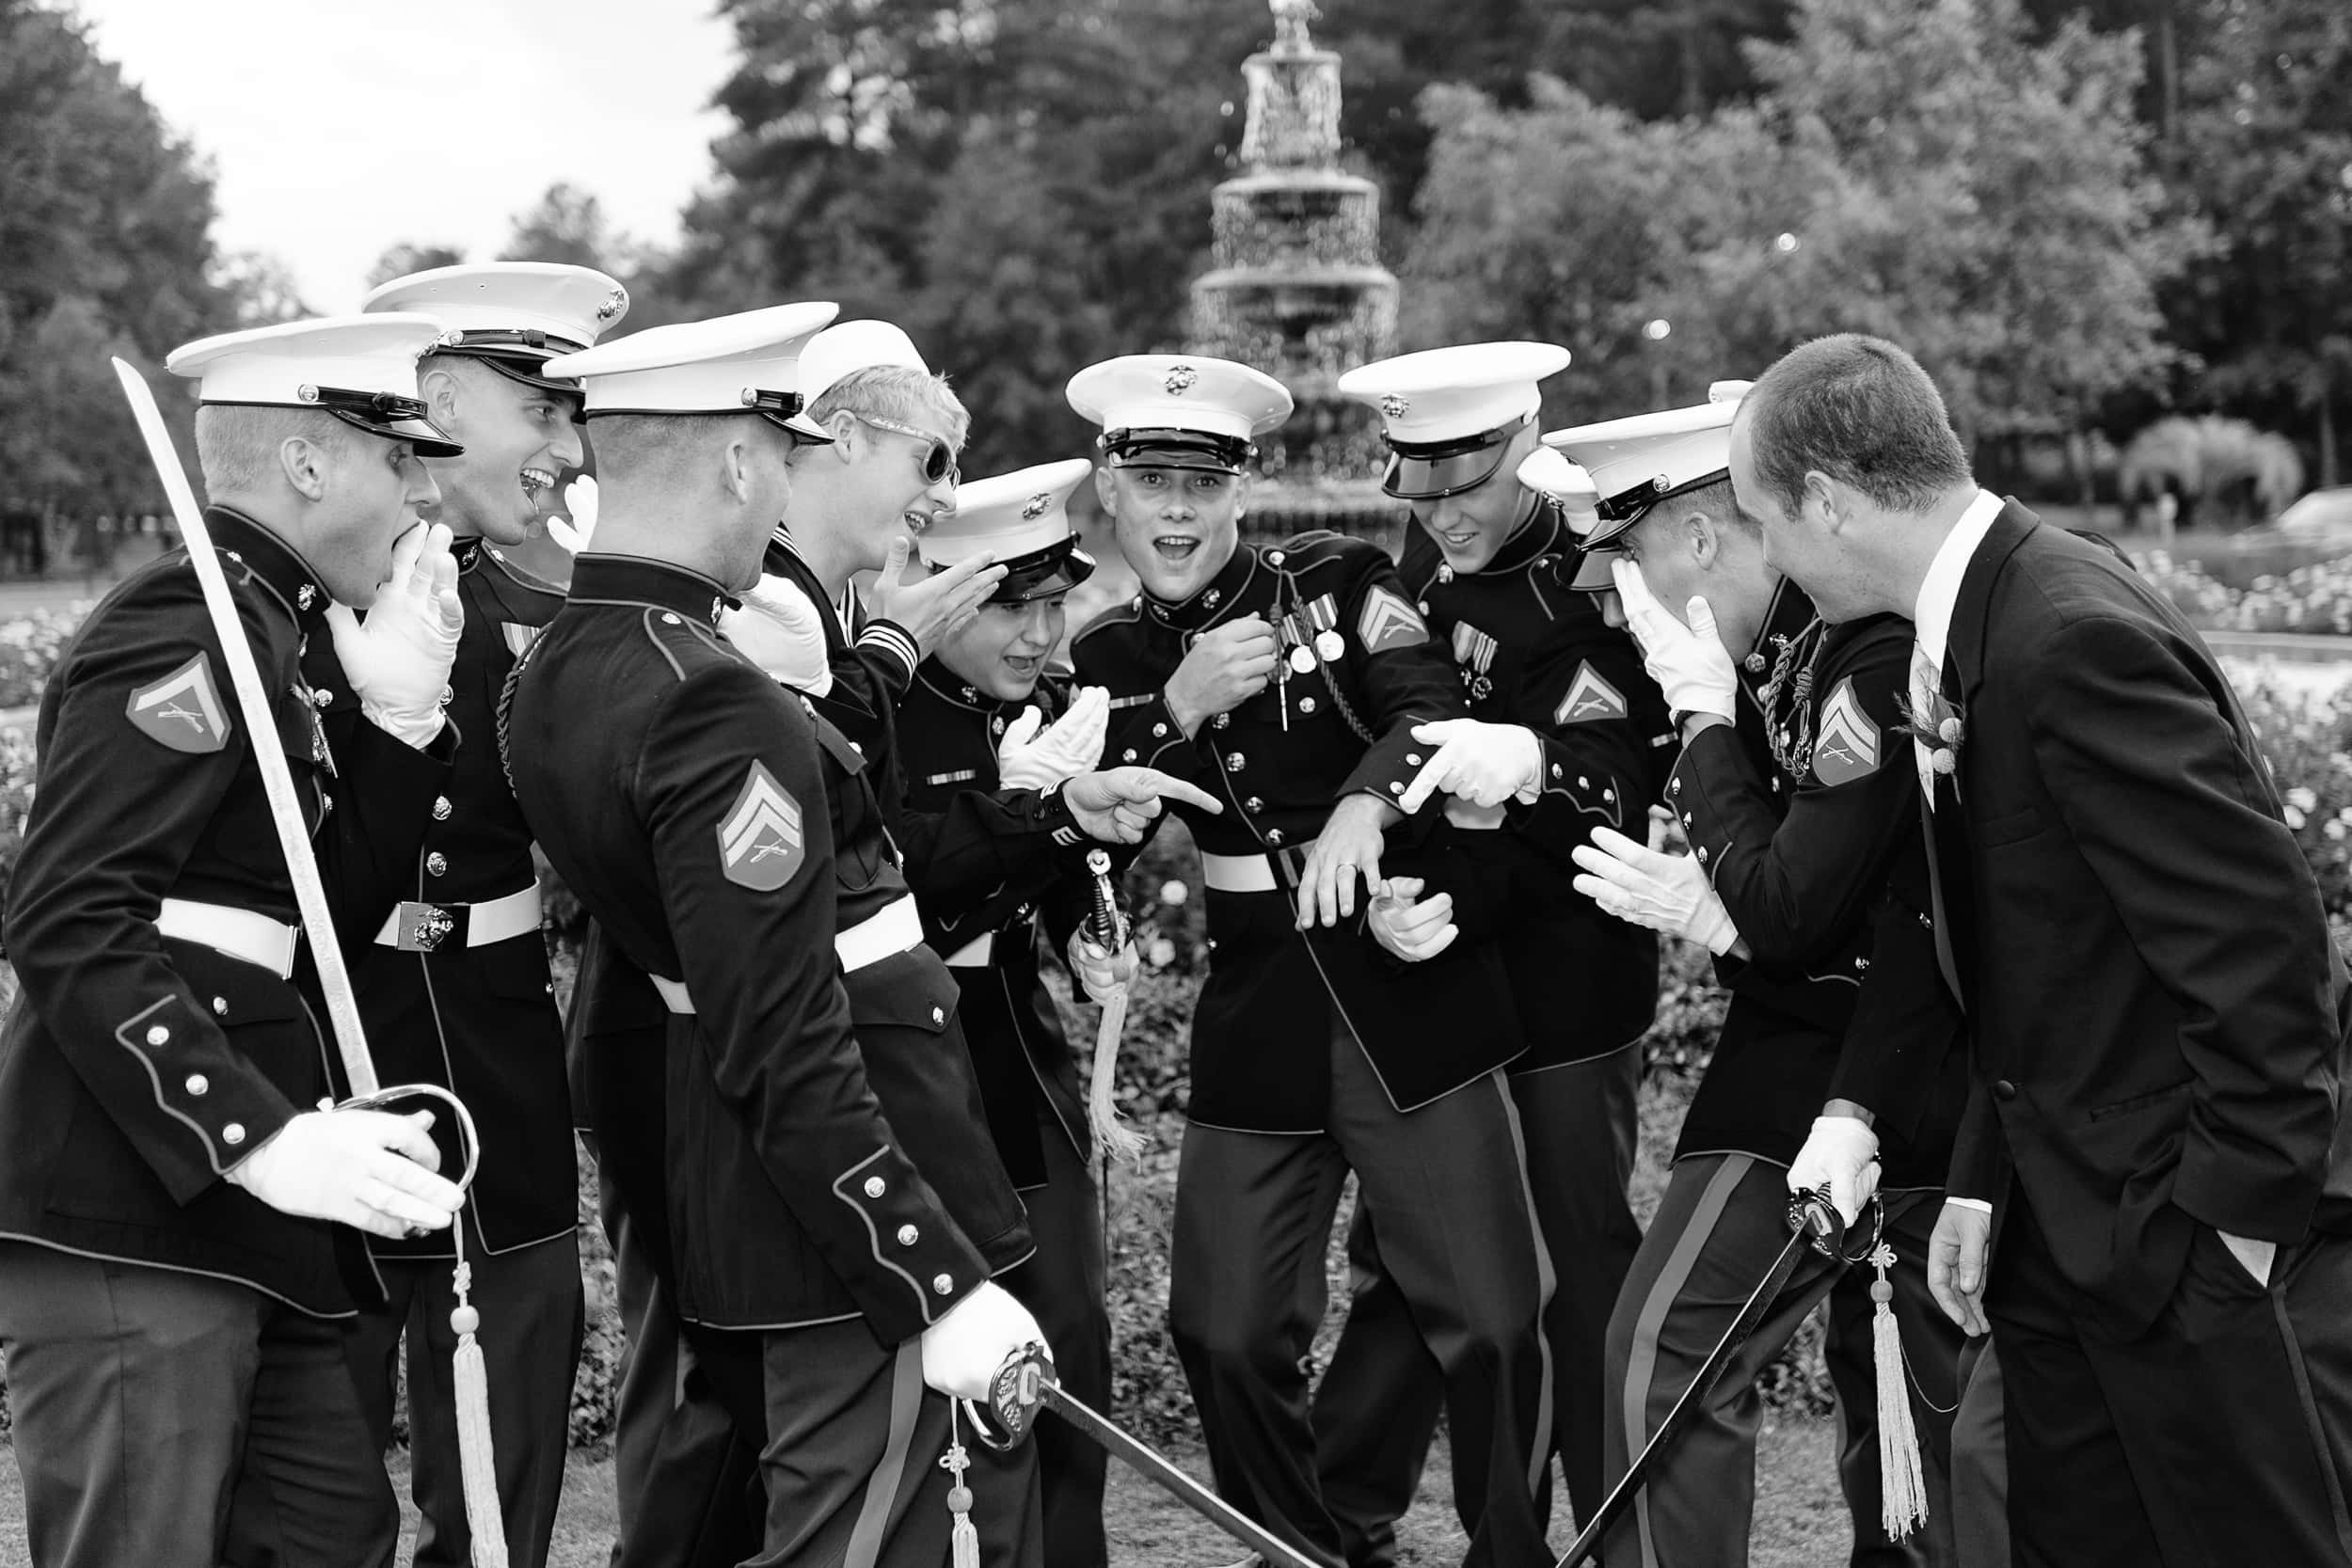 Groomsmen pretending to be excited about ring in military uniforms -